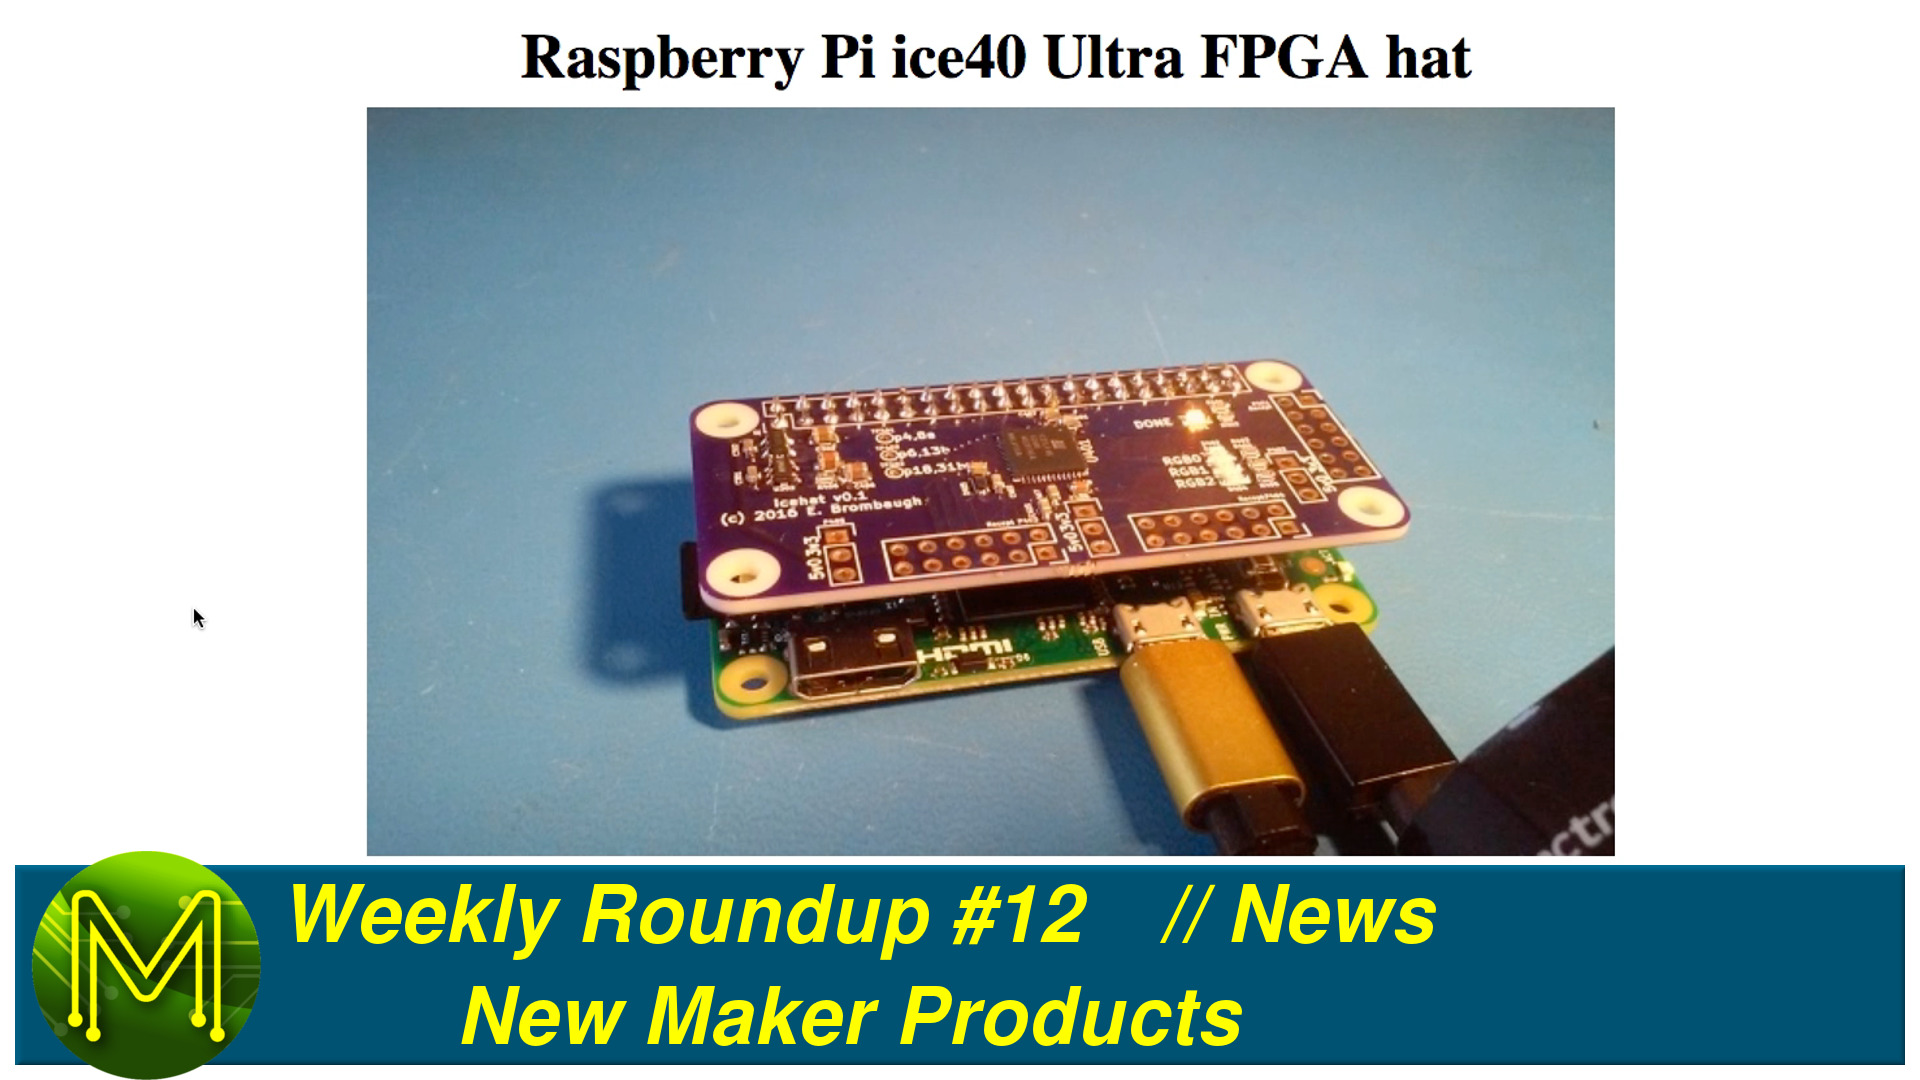 Weekly Roundup #12 - New Maker Products // News